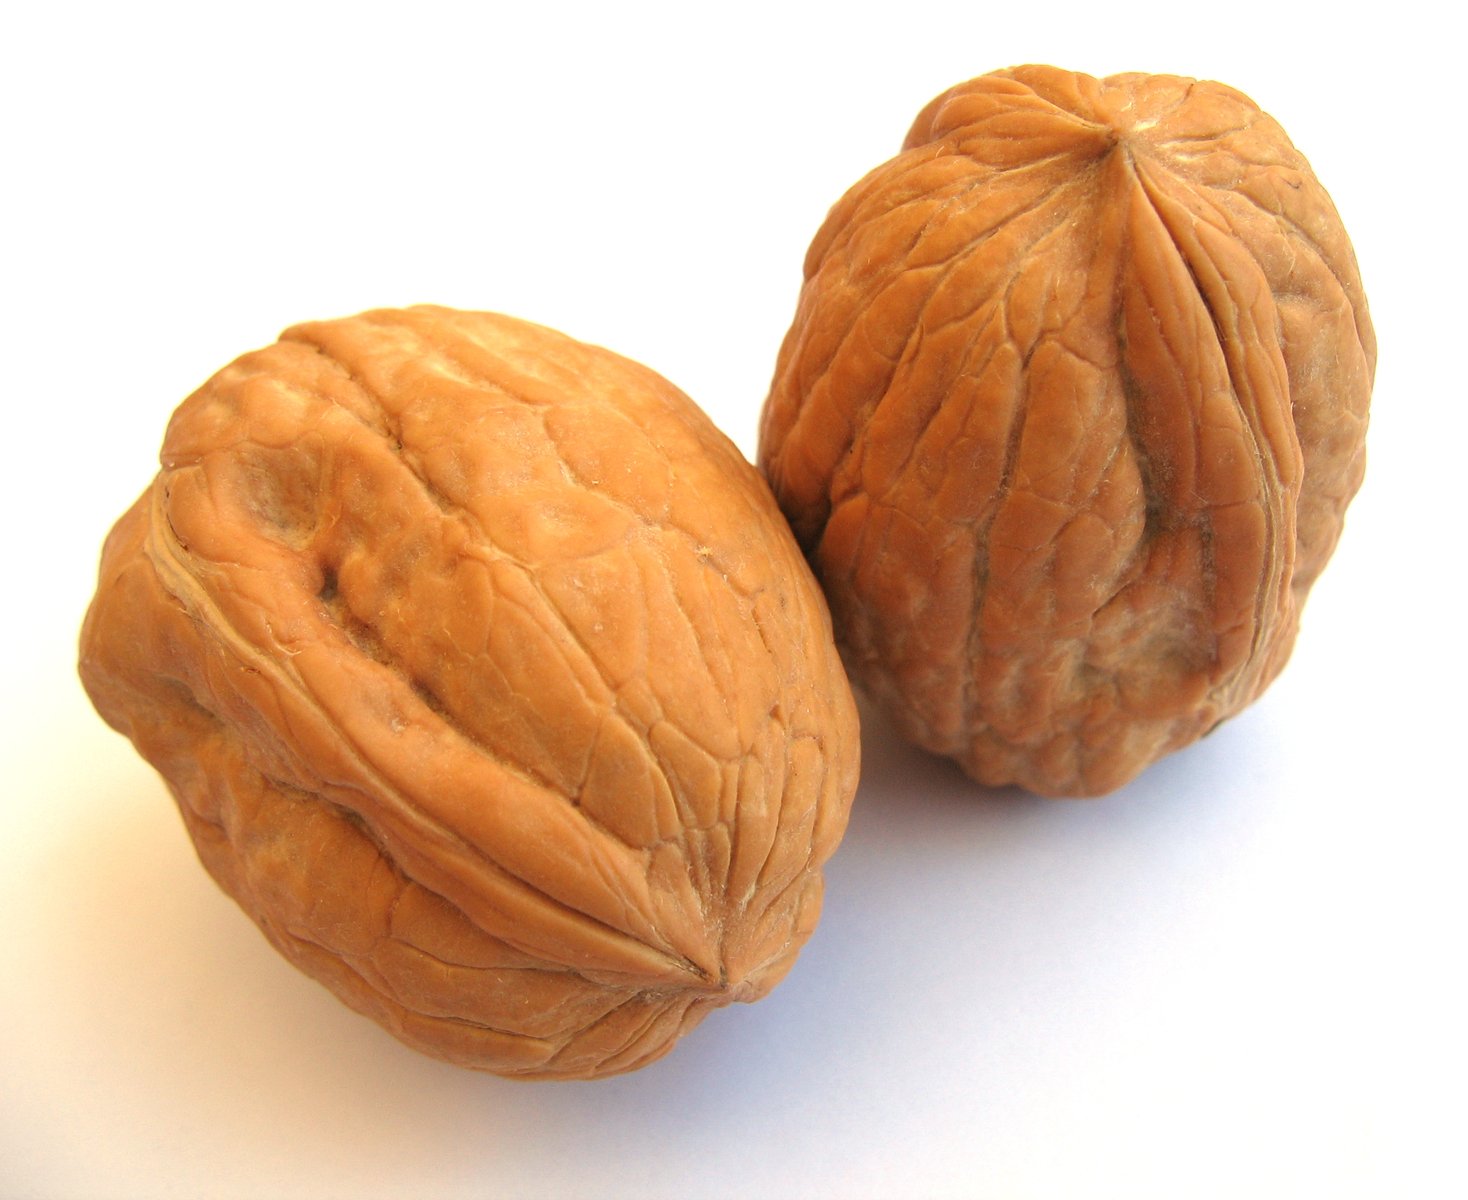 Health Benefits of Walnut - How to Boost Your Immunity